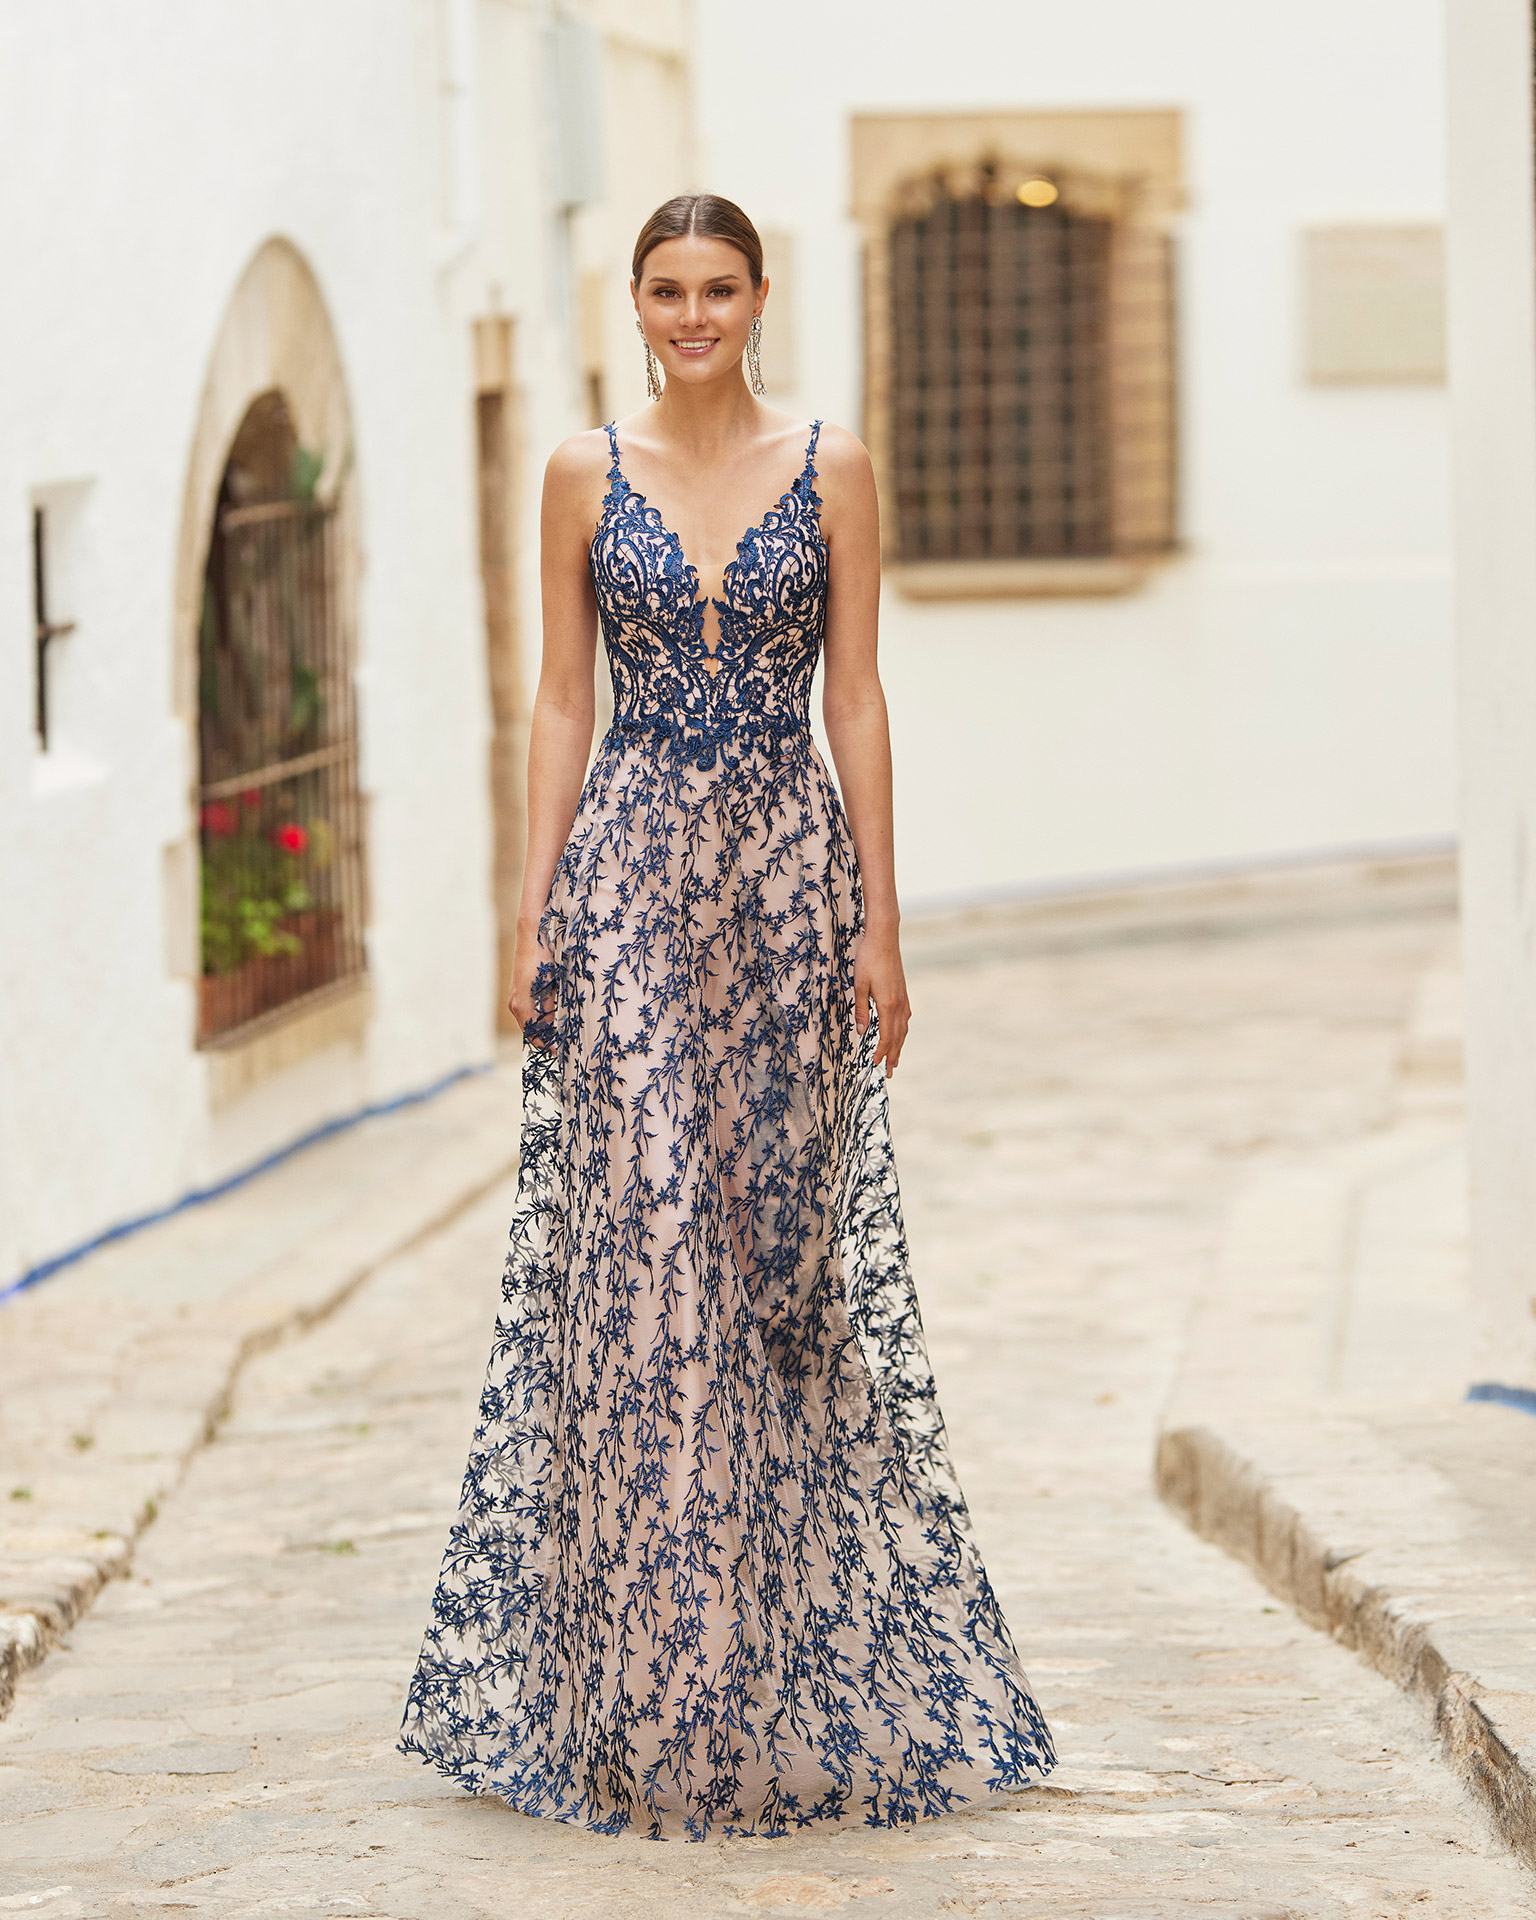 Lace cocktail dress. V-neckline and plunging back. With shawl. 2022 MARFIL_BARCELONA Collection.